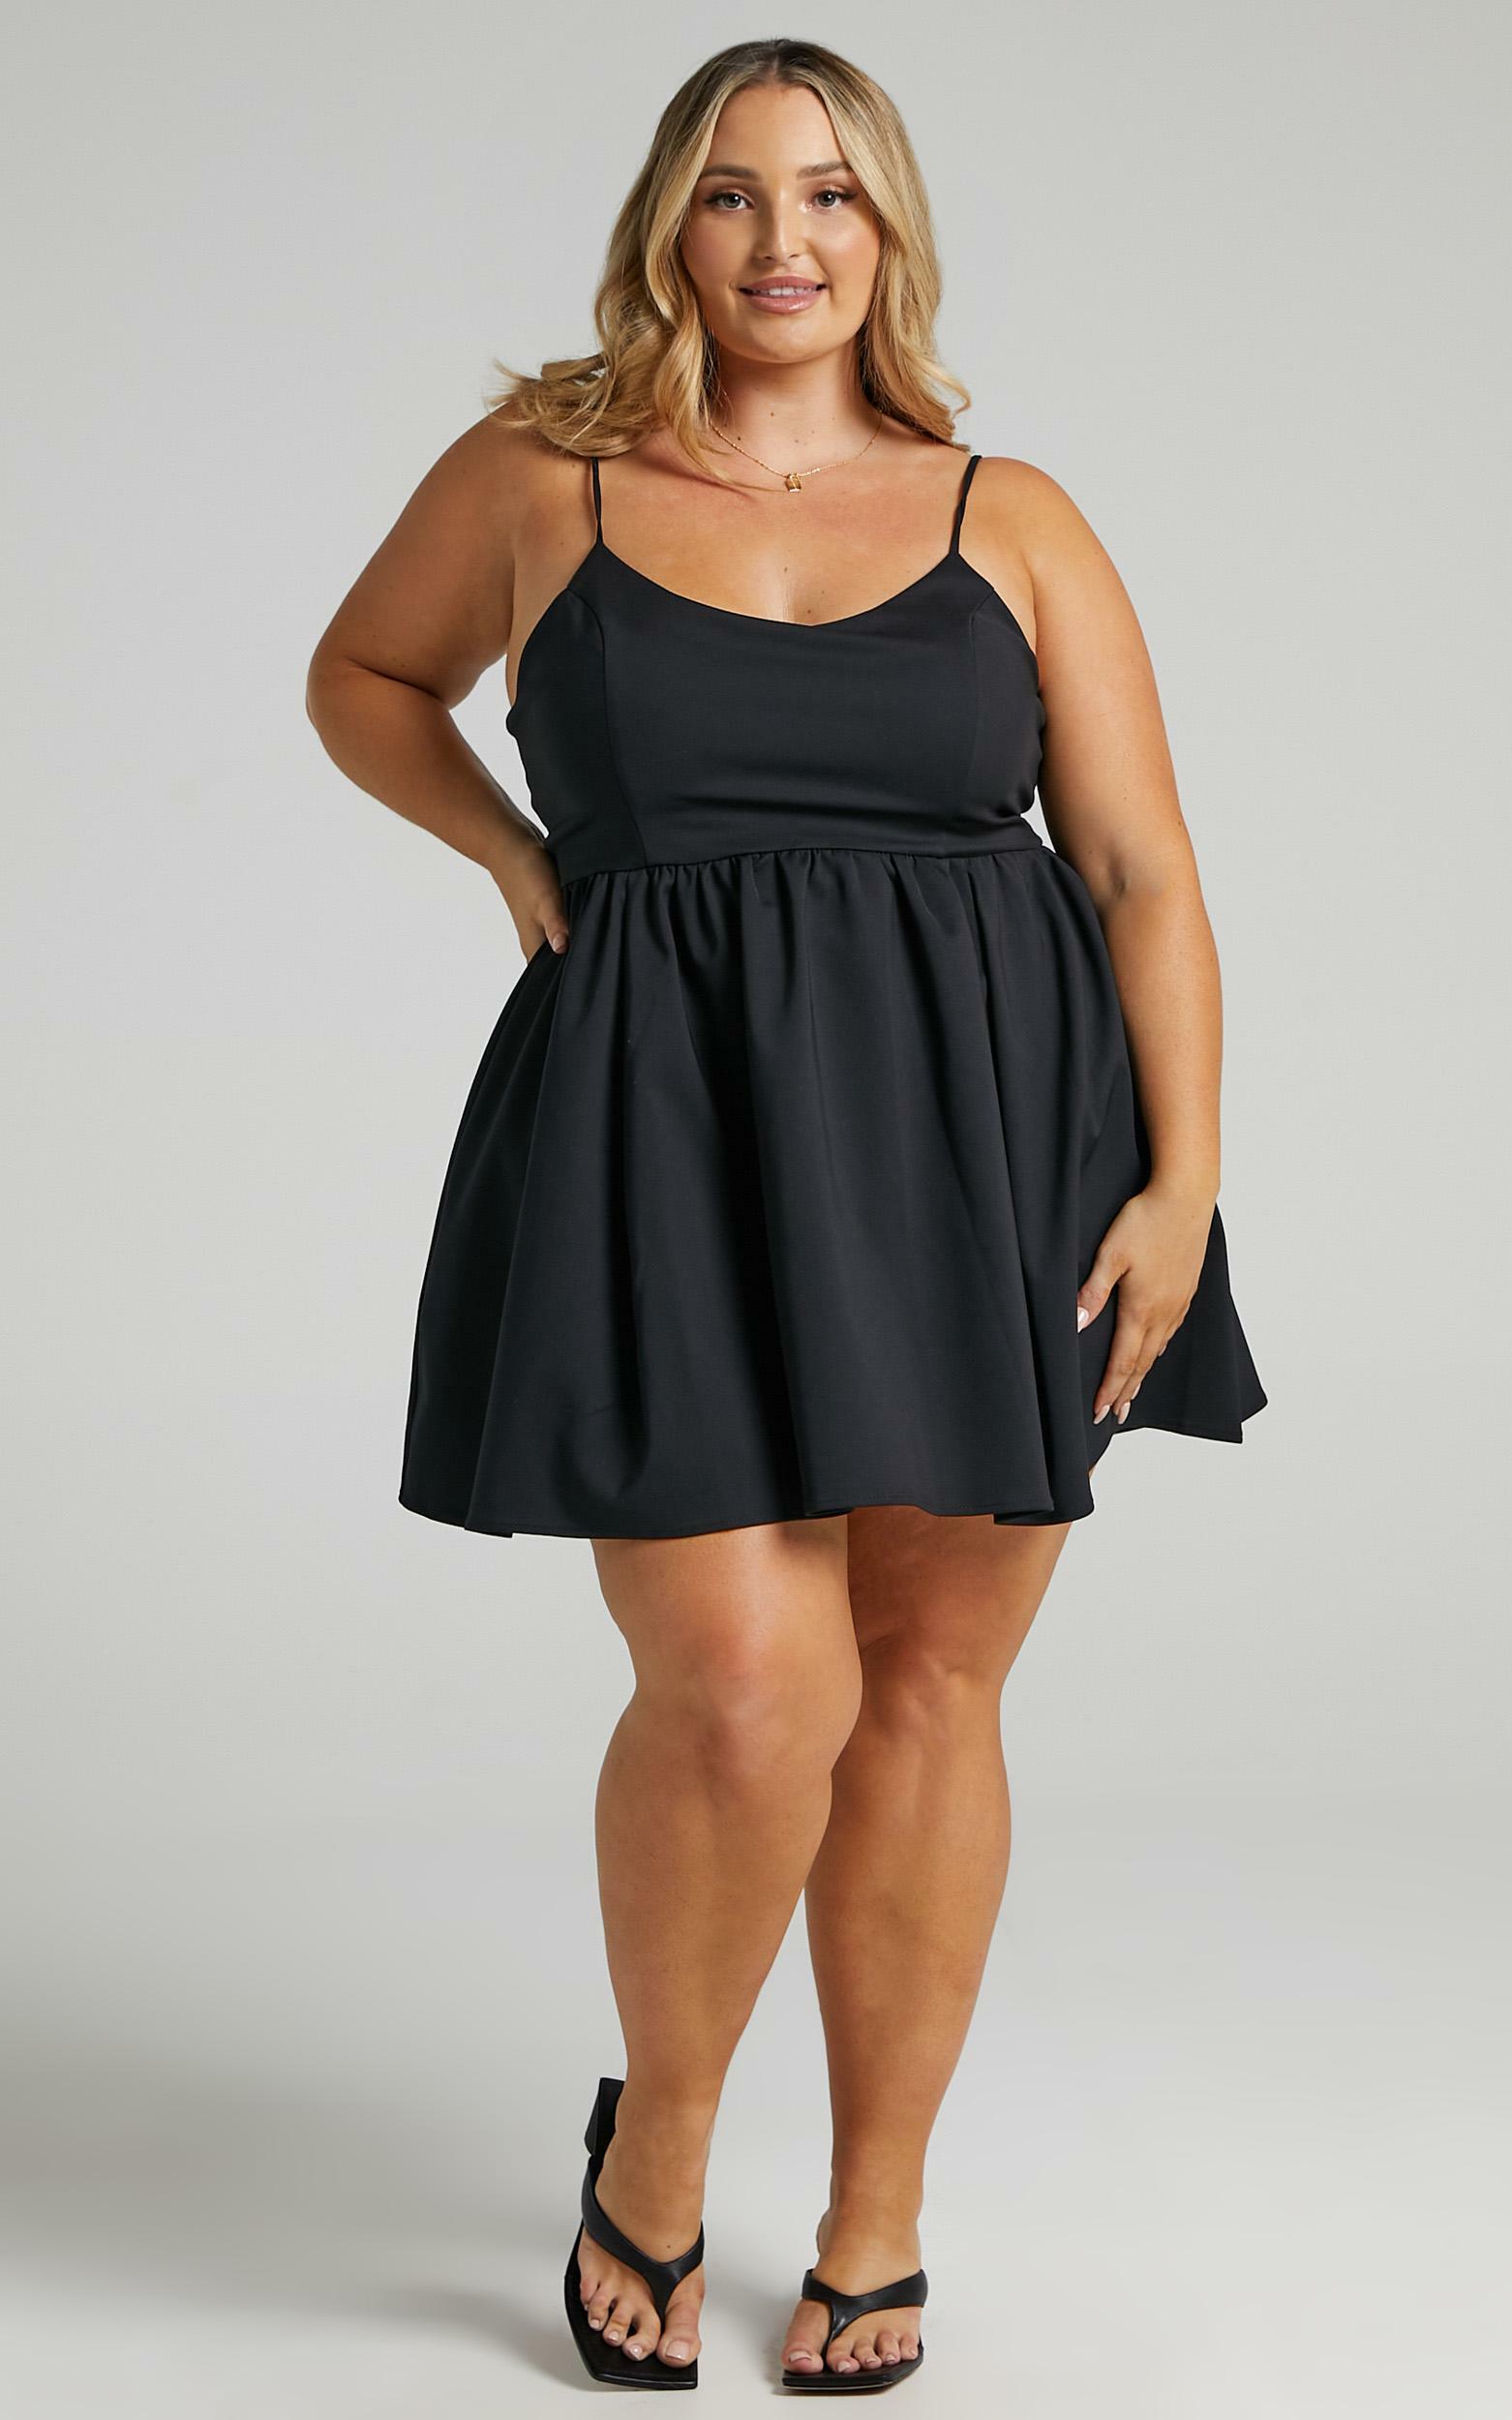 You Got Nothing To Prove A-line Mini Dress in Black - 04, BLK1, hi-res image number null